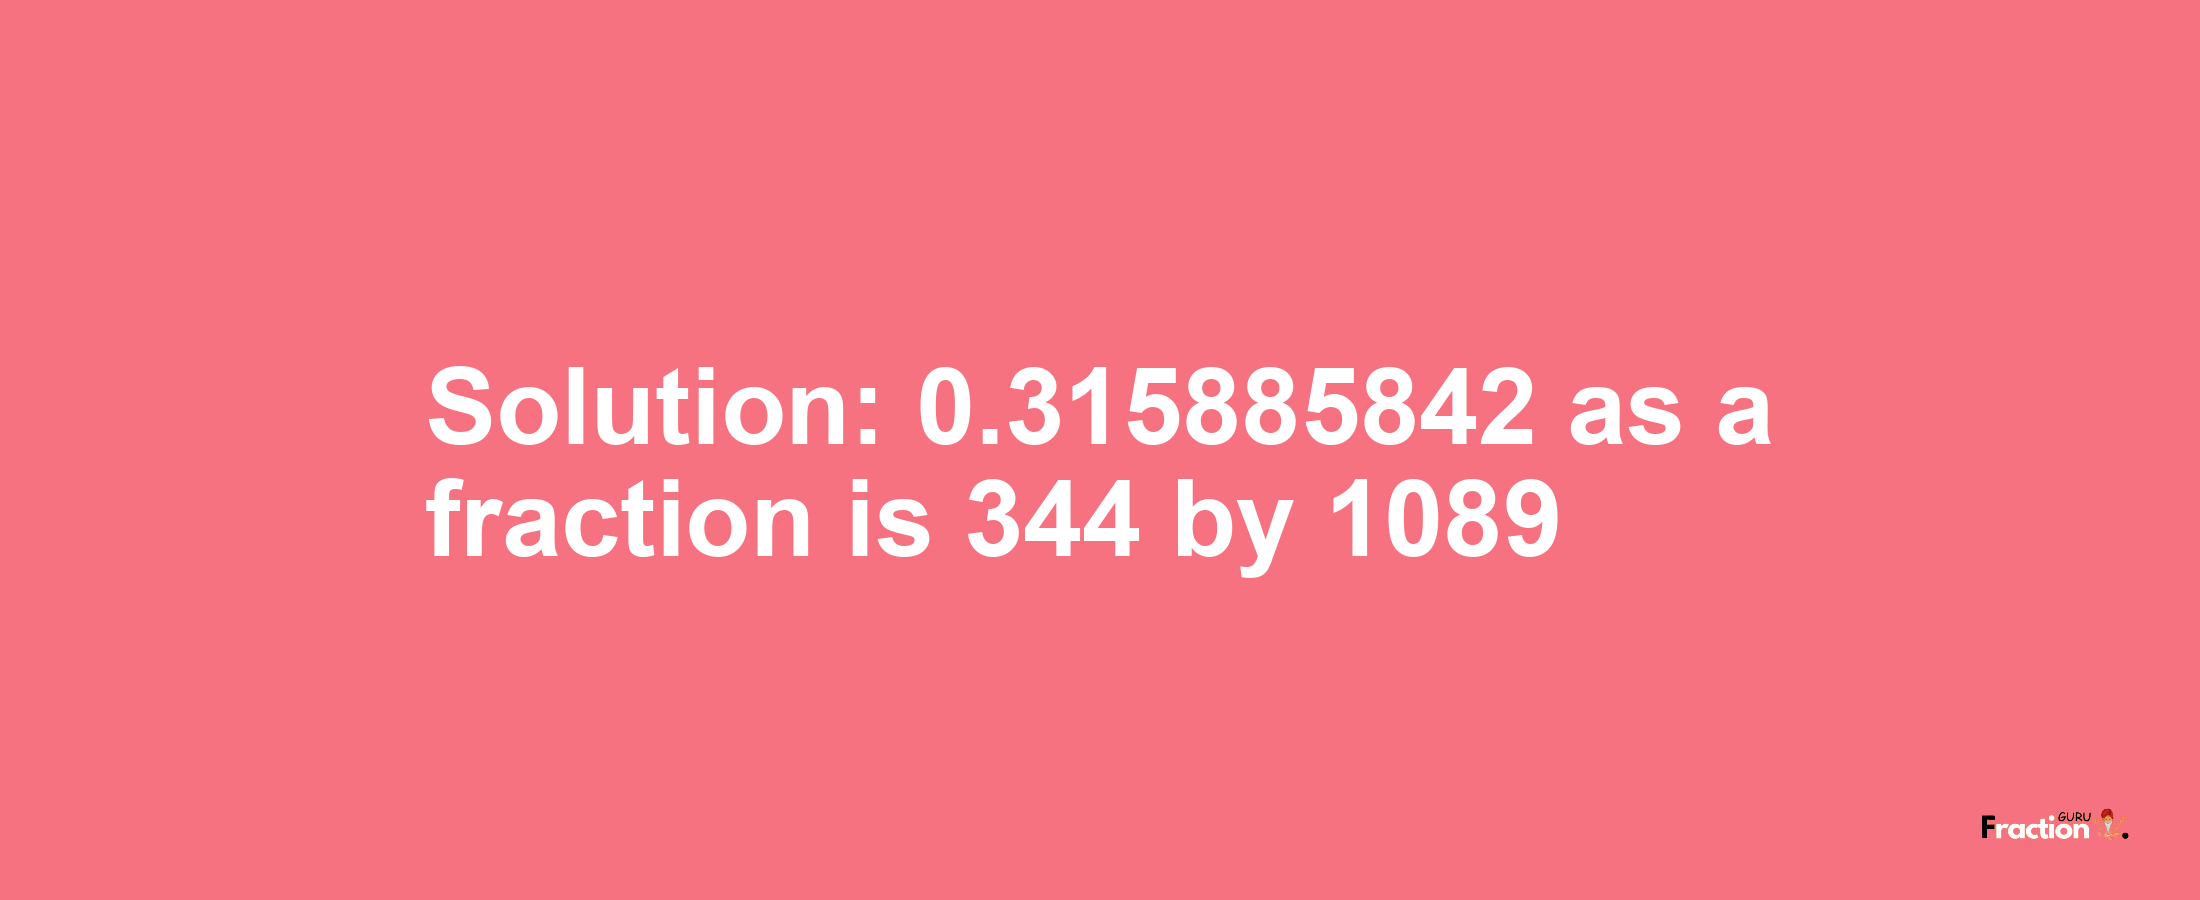 Solution:0.315885842 as a fraction is 344/1089